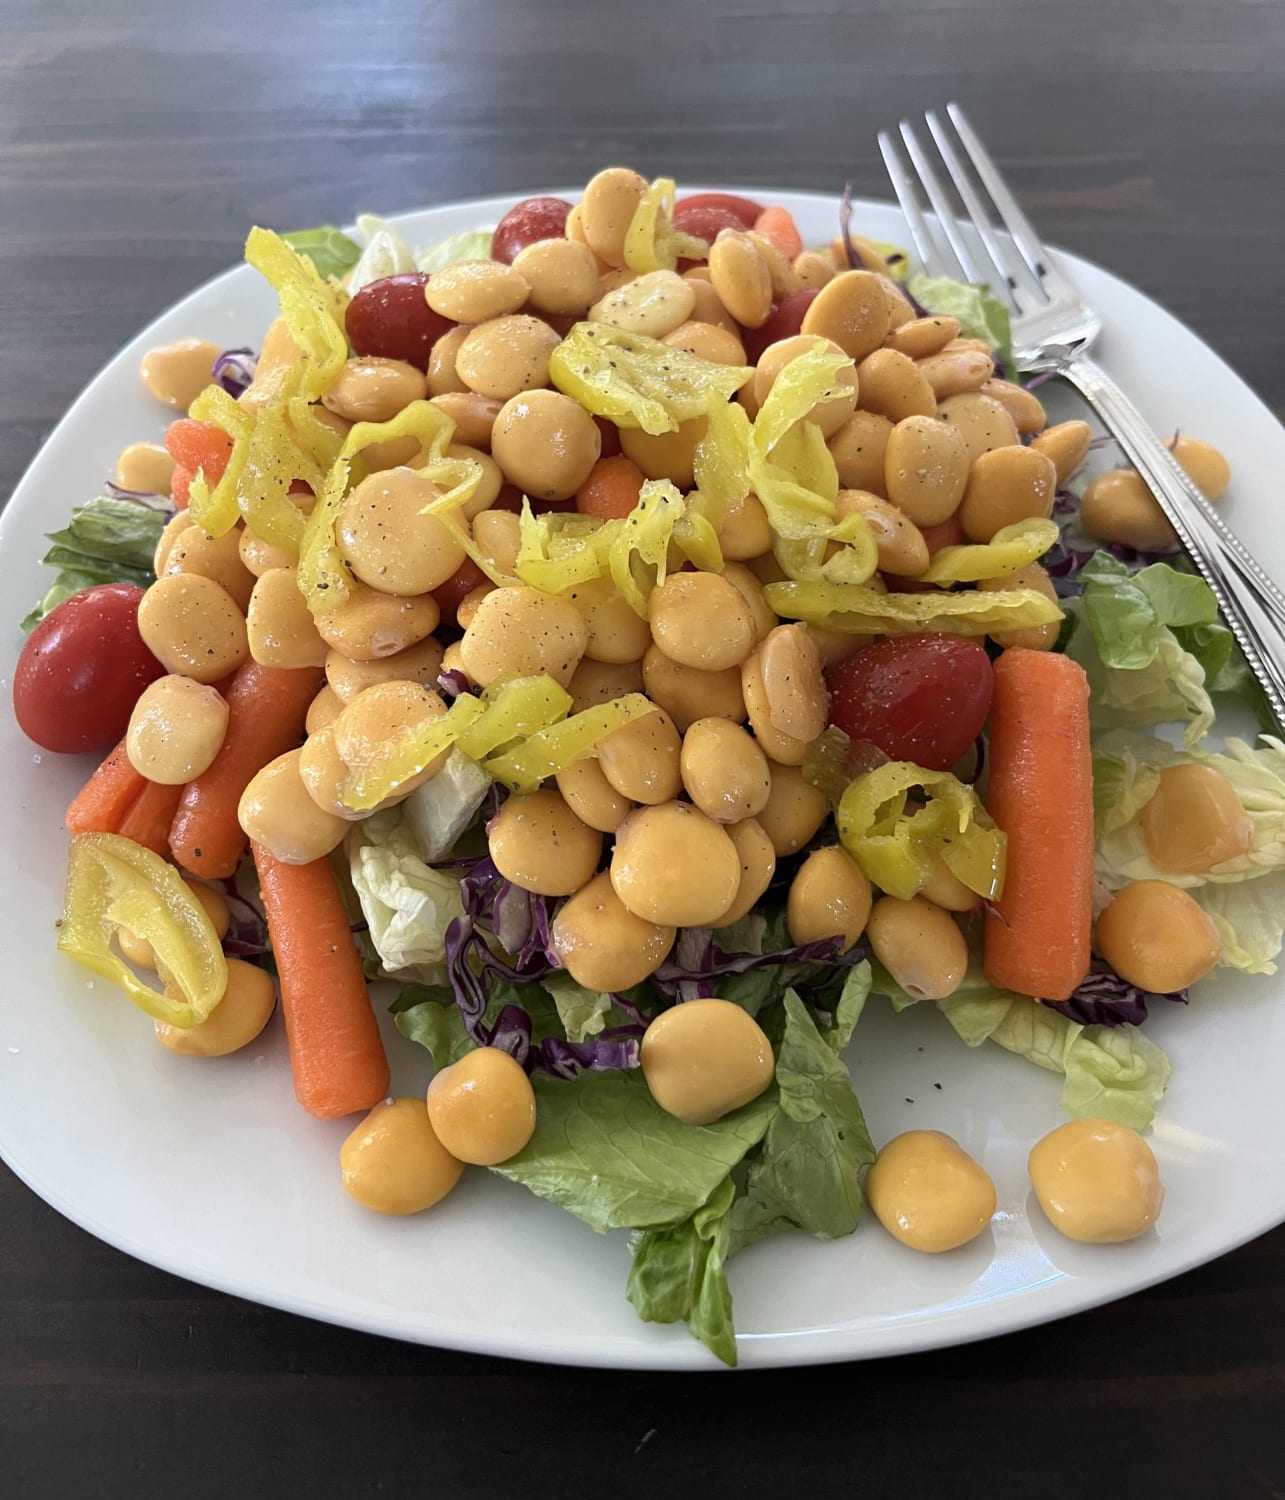 I’m a longtime vegan, trying to eat healthier. I had this delicious mountain of salad for lunch today.